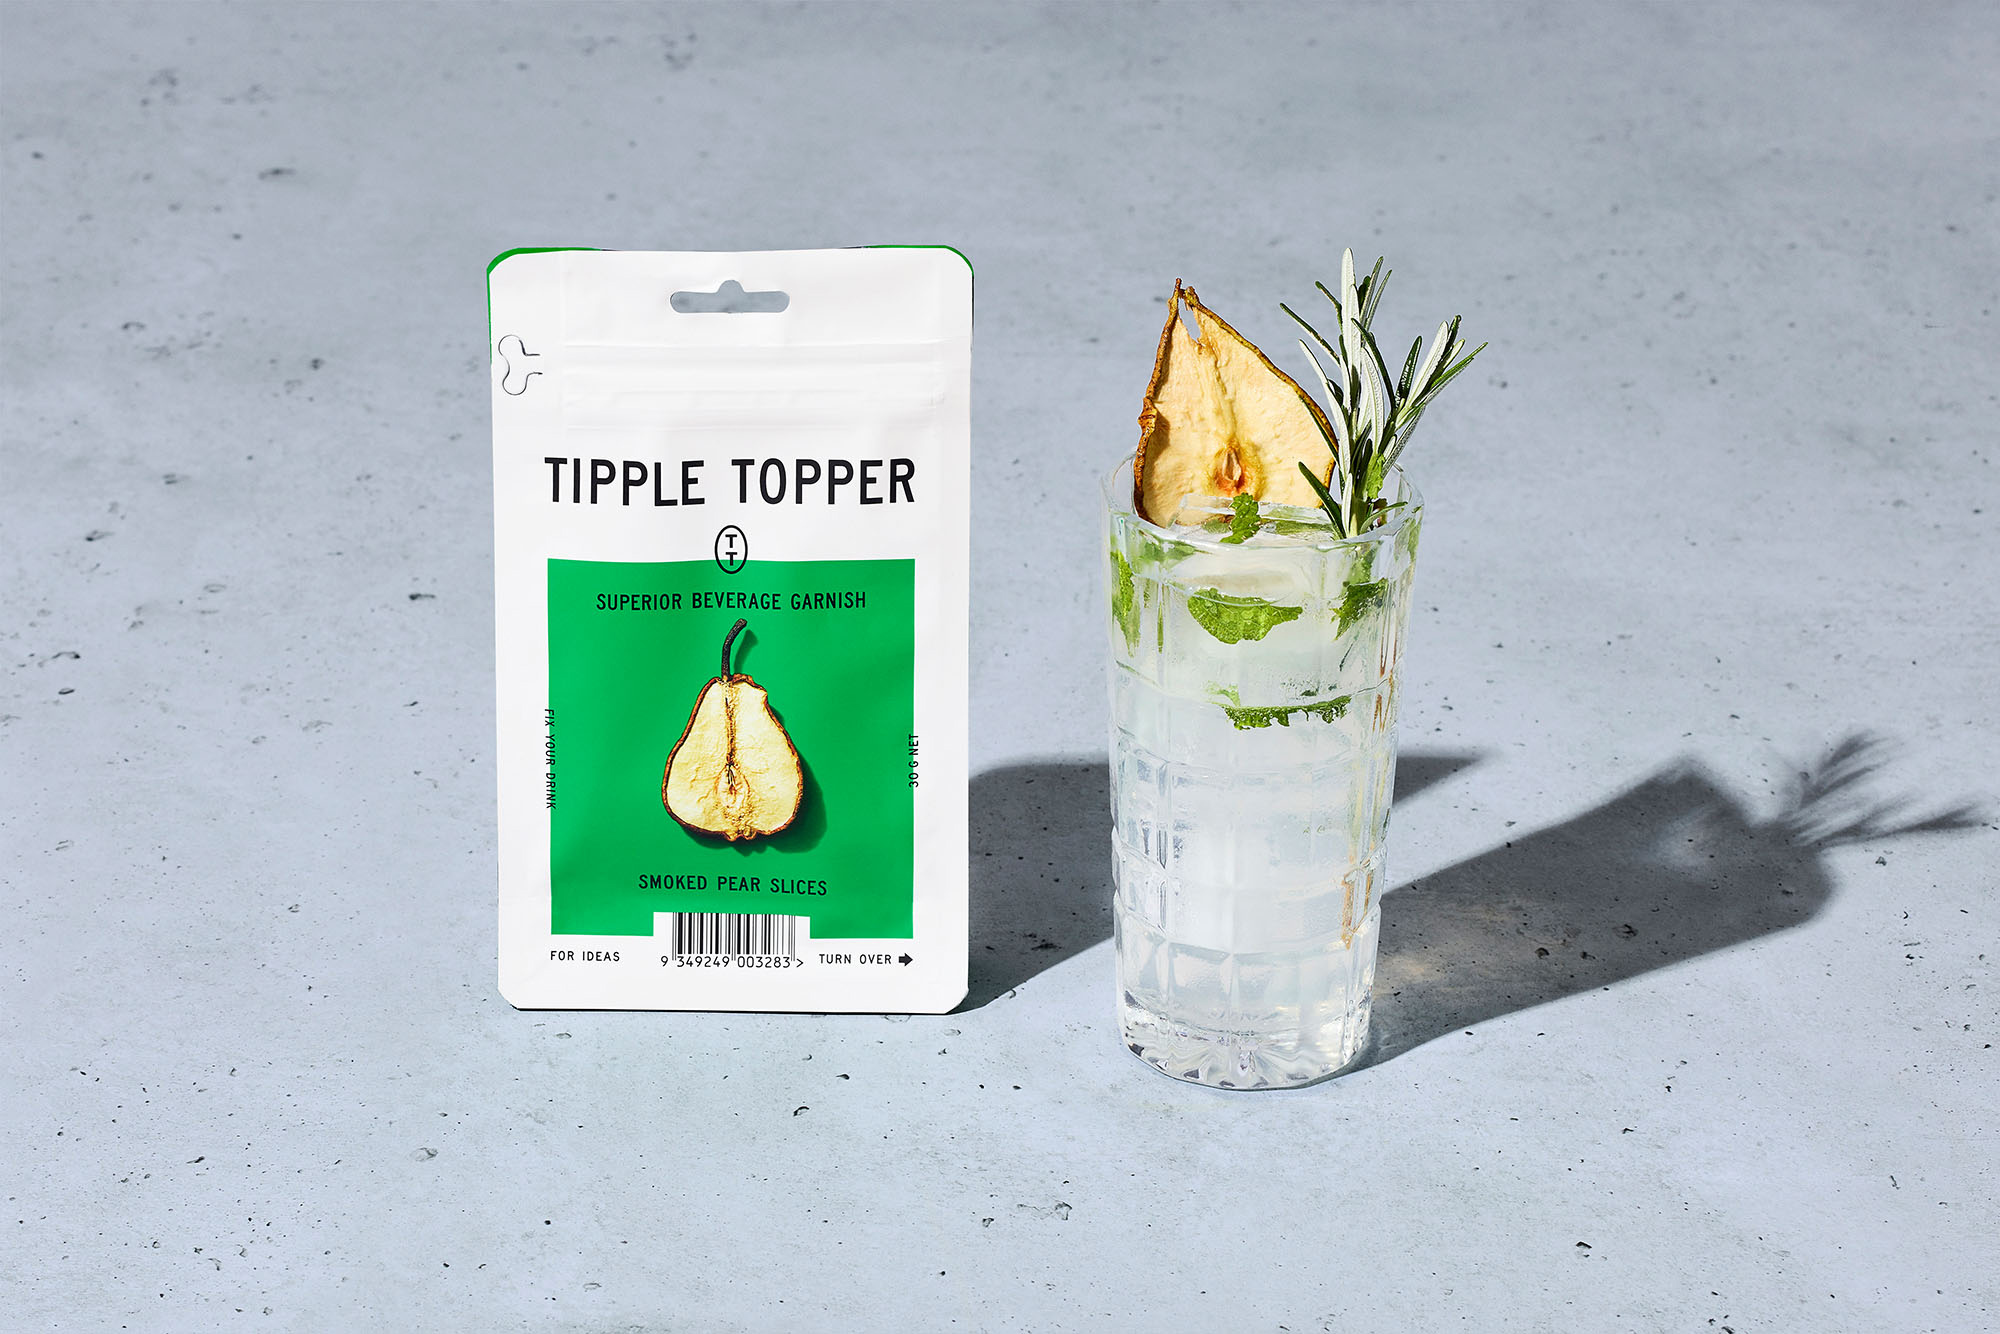 Brand identity, packaging design and art direction by Marx Design for Australian cocktail garnish brand Tipple Topper